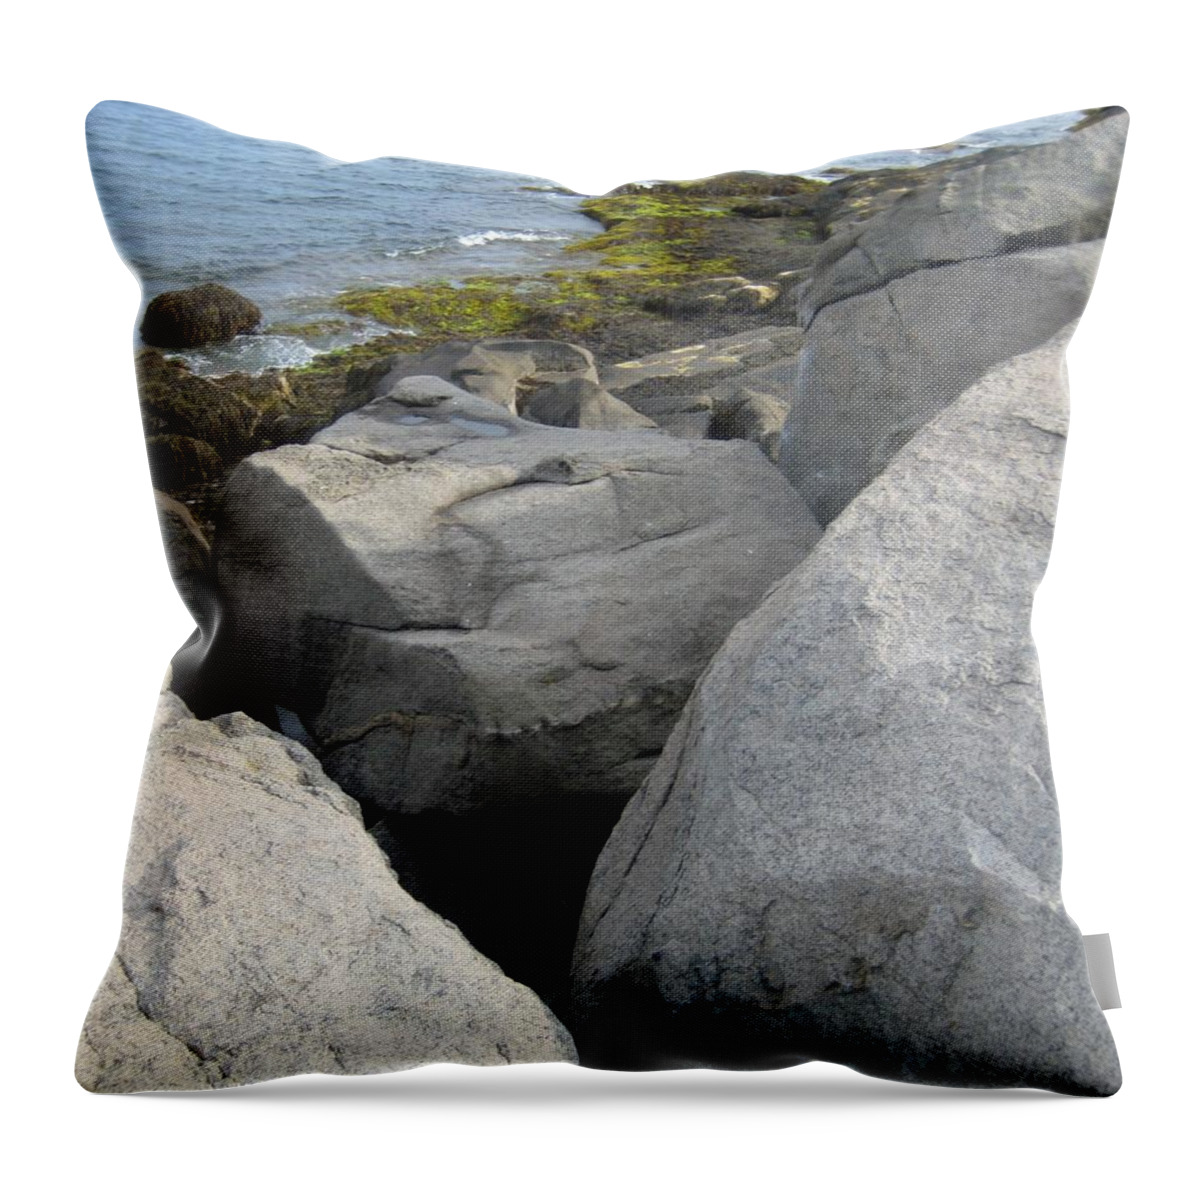 Waterscape Throw Pillow featuring the photograph The Lair by Melissa McCrann